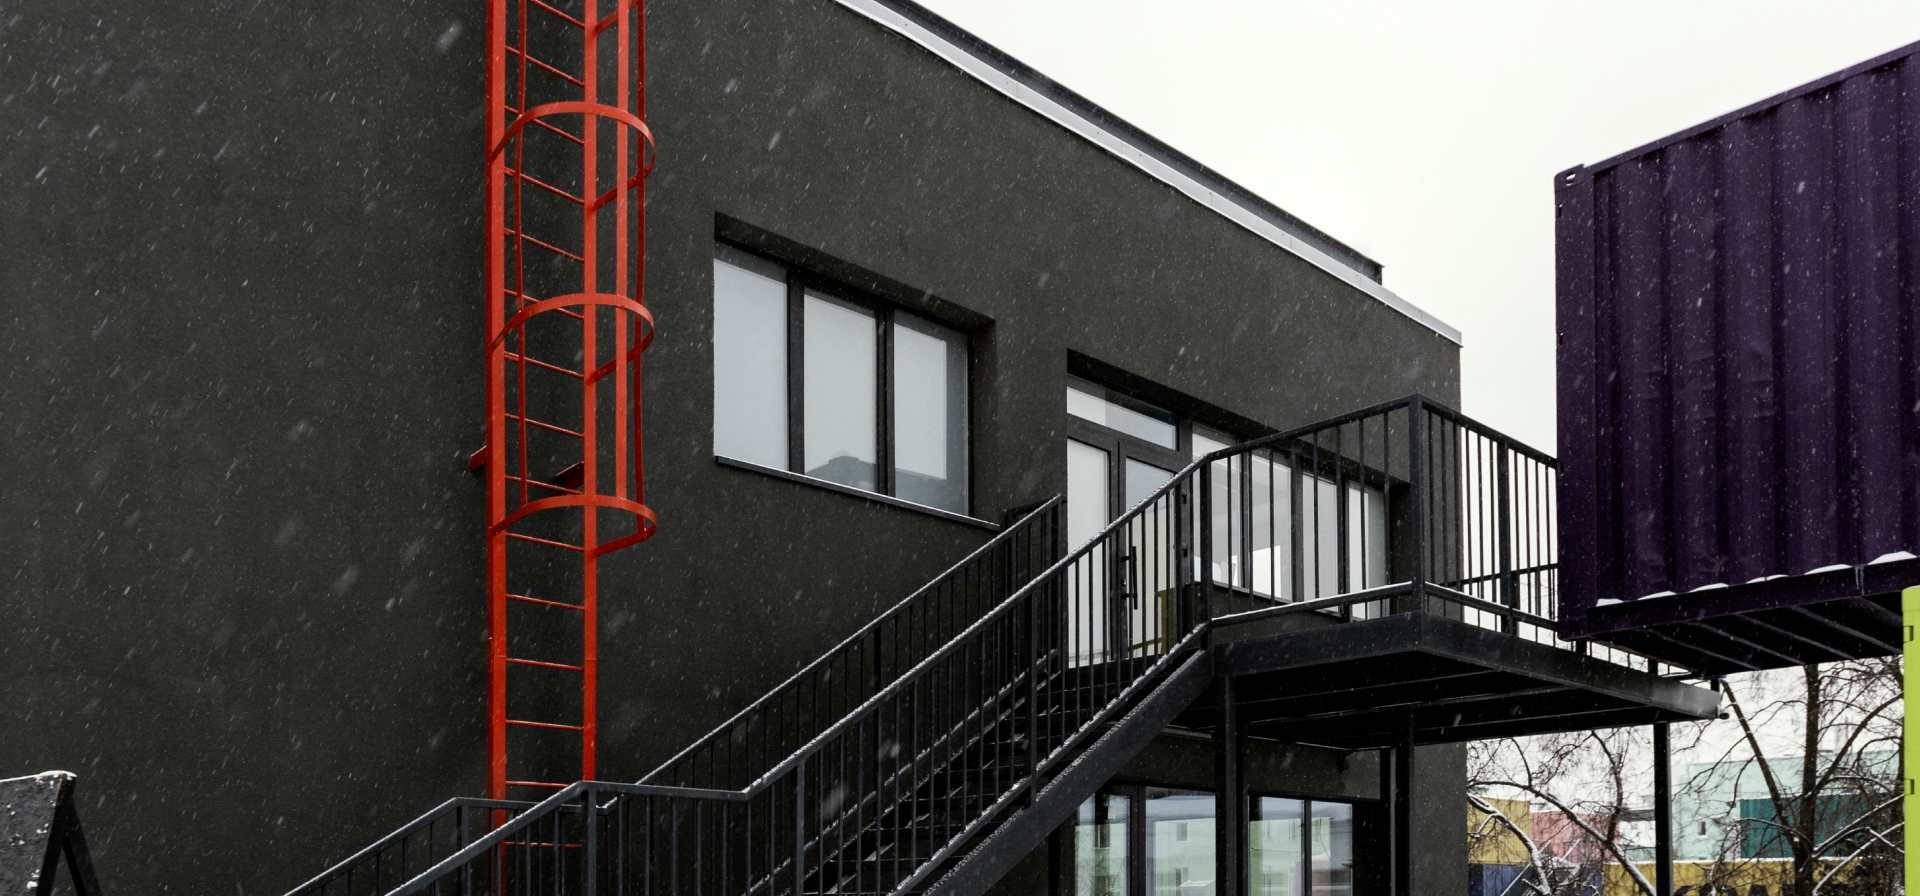 A modular building structure with black walls and emergency ladder.